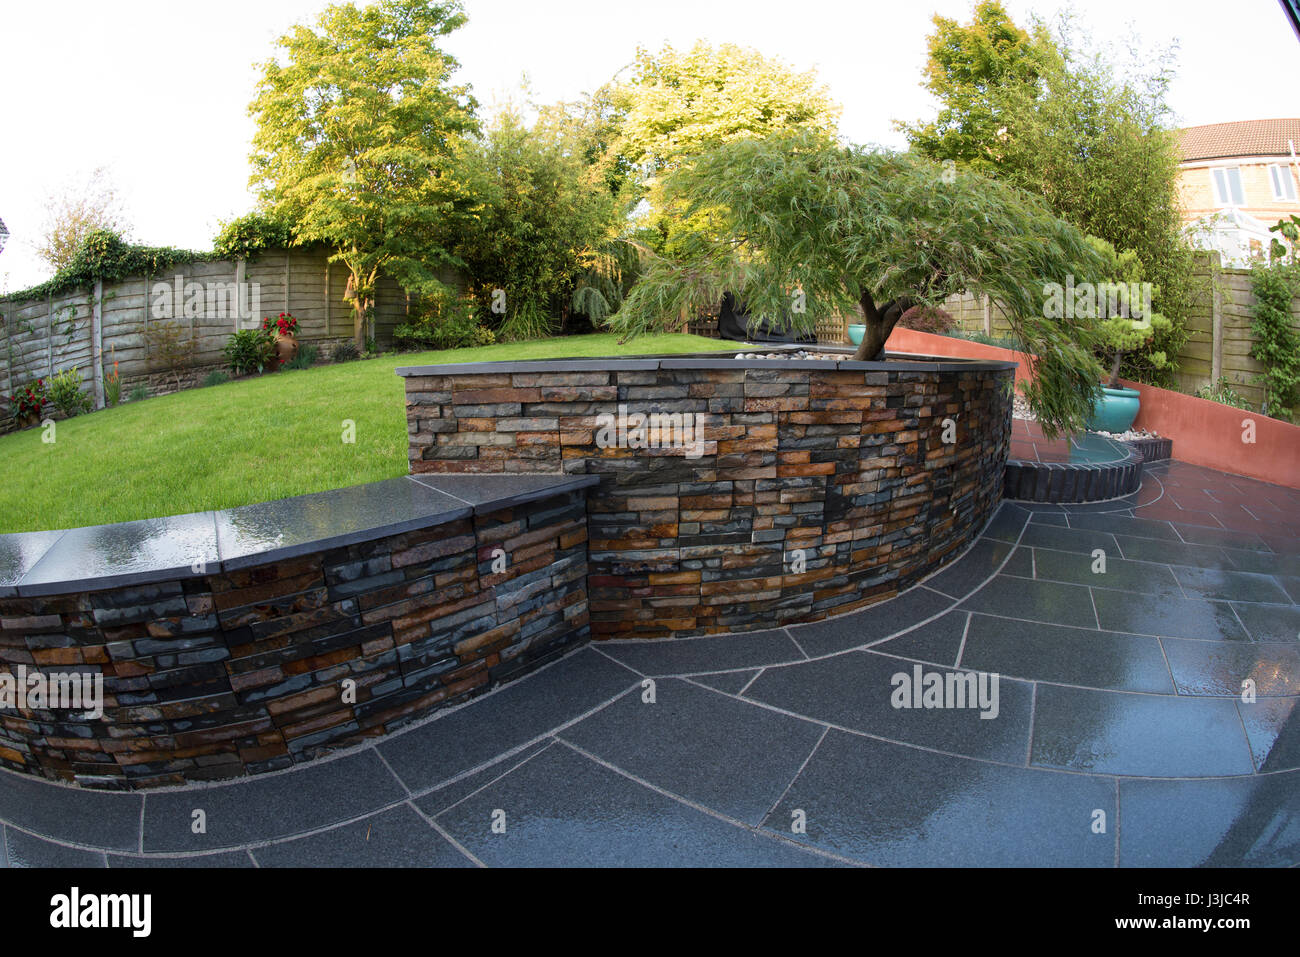 new garden design and construction by an approved Marshalls contractor Stock Photo